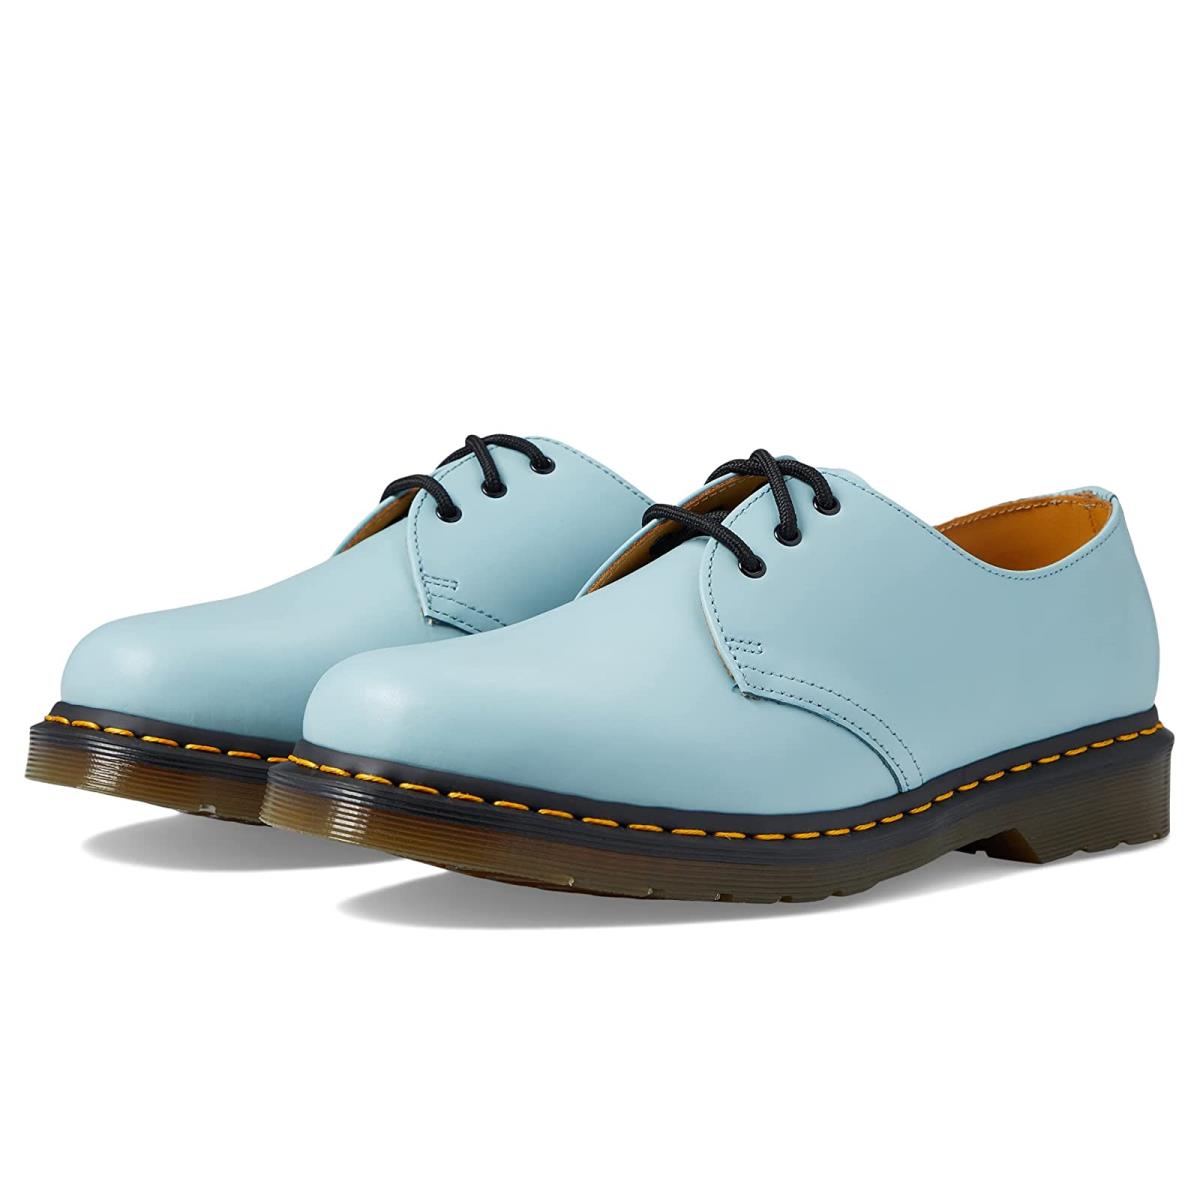 Unisex Oxfords Dr. Martens 1461 Smooth Leather Shoes Card Blue Smooth